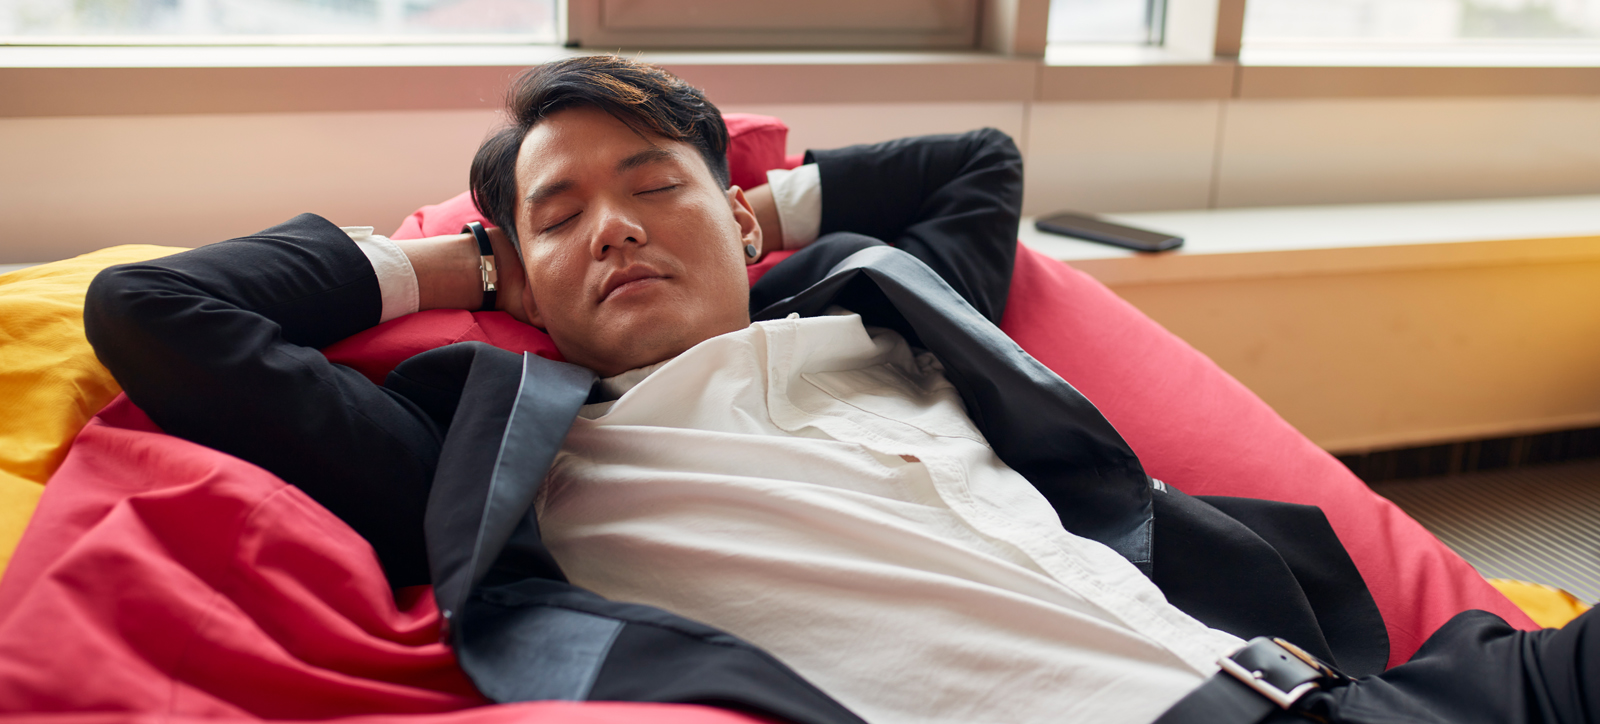 A worker in a suit enjoys an afternoon nap in the office.